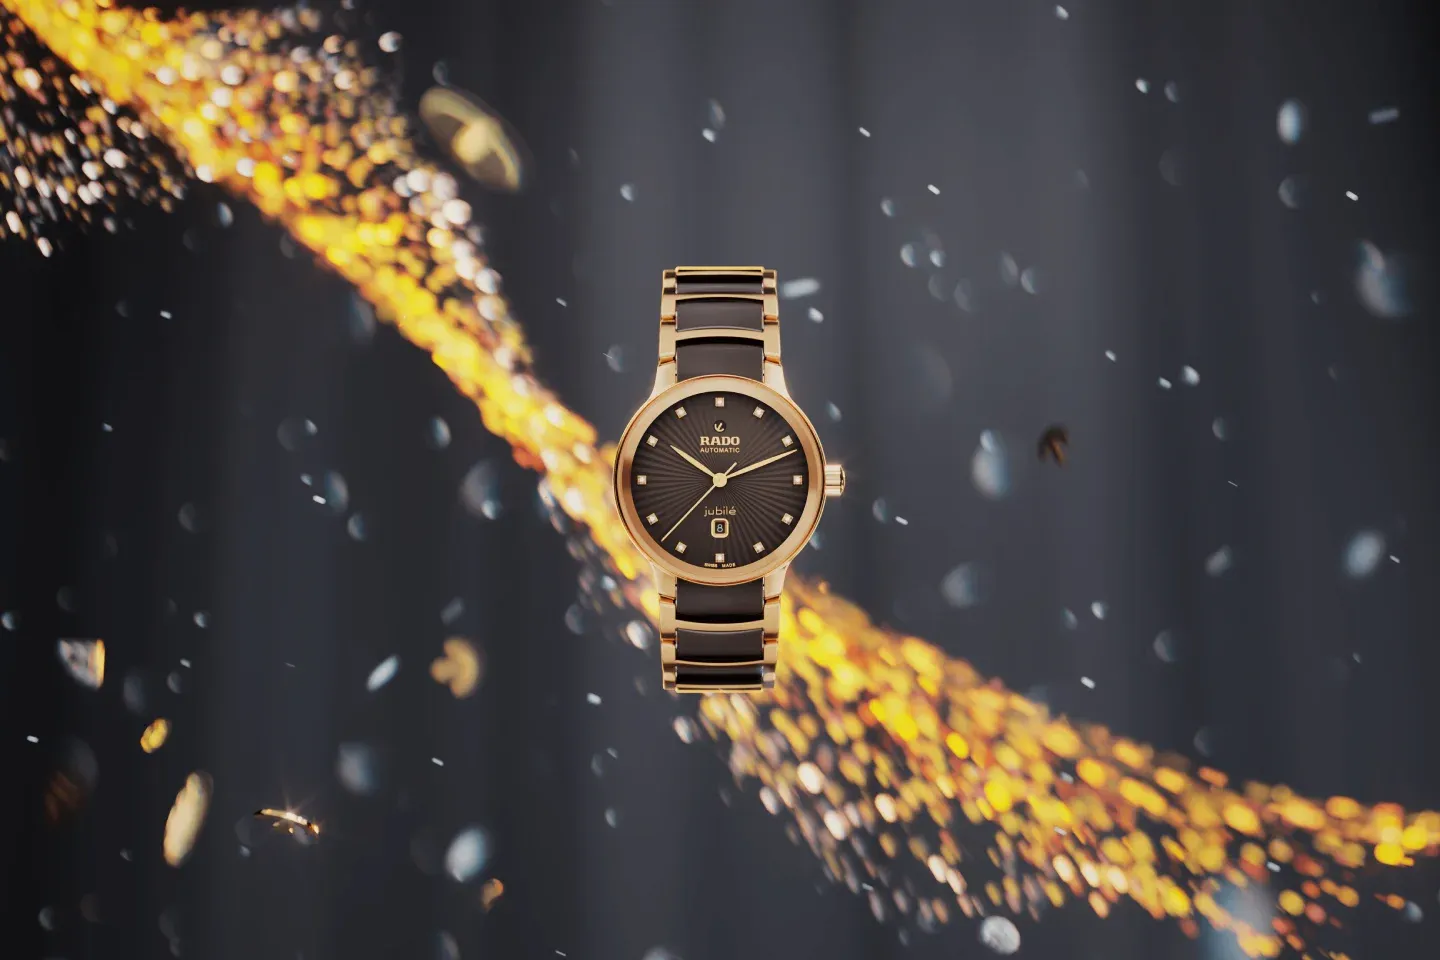 Rado launched an exclusive timepiece collection for the Indian festive and wedding season